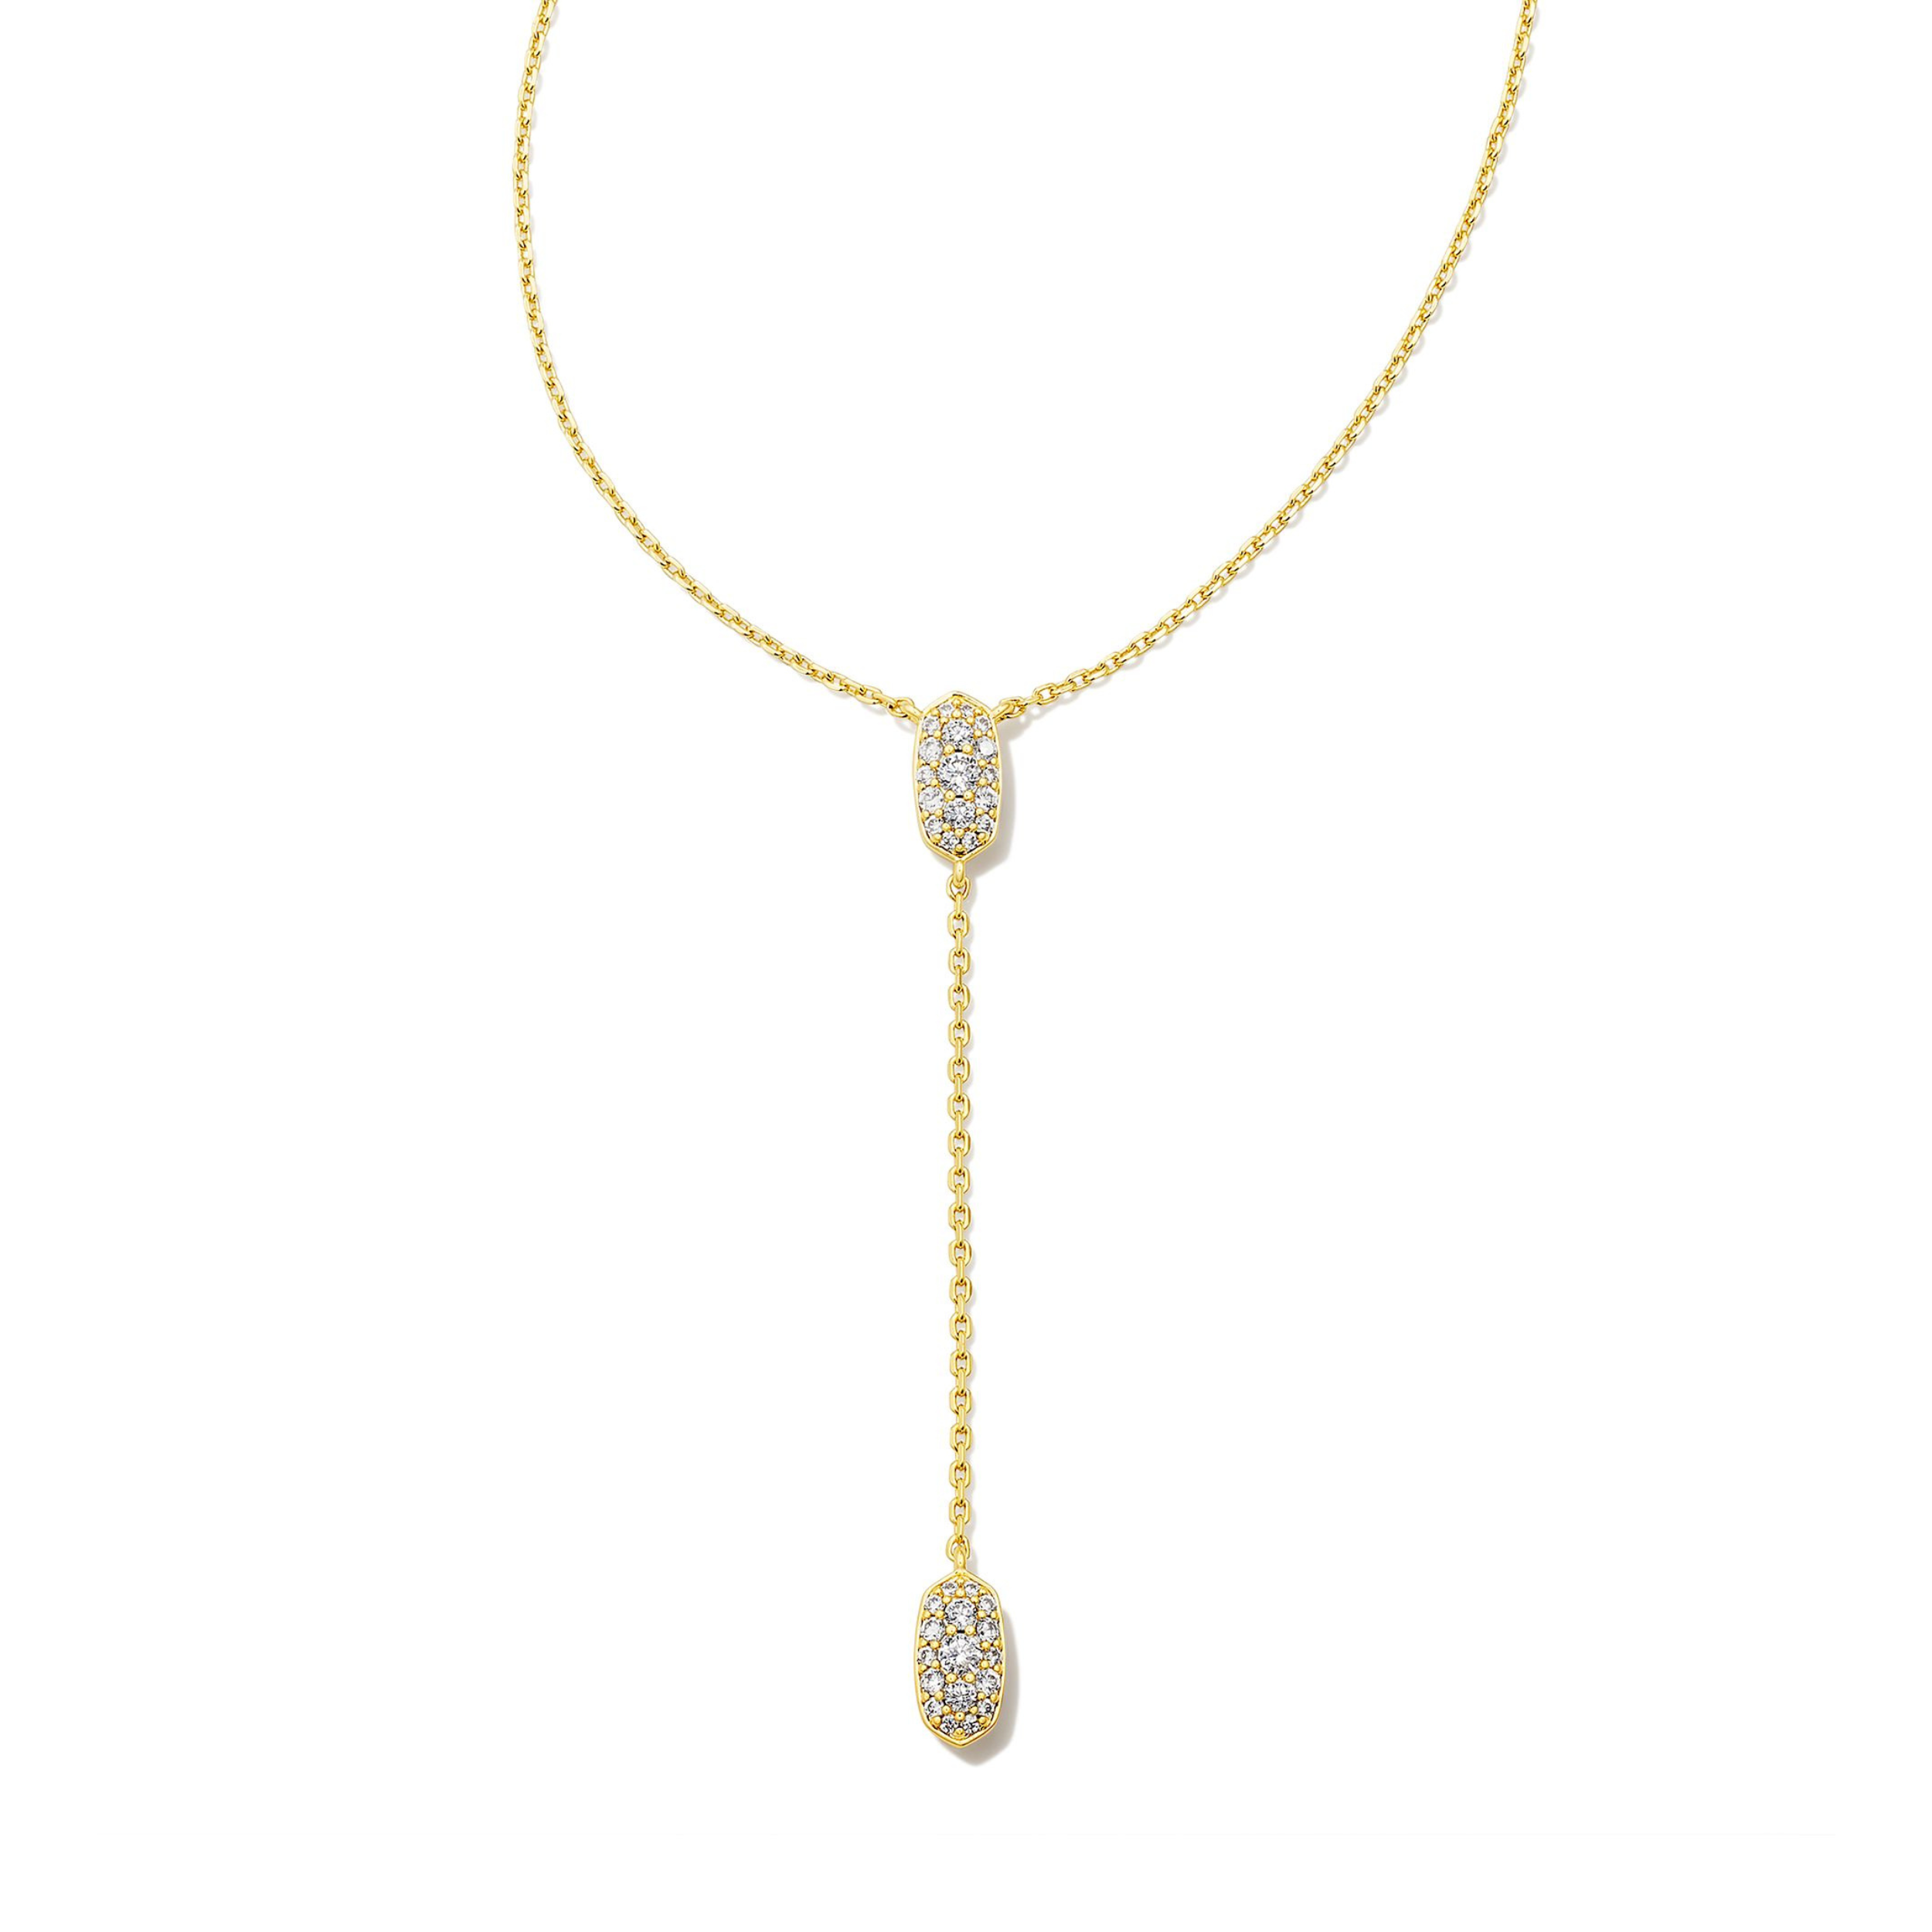 Gold, lariat chain necklace with clear crystals pictured on a white background. 